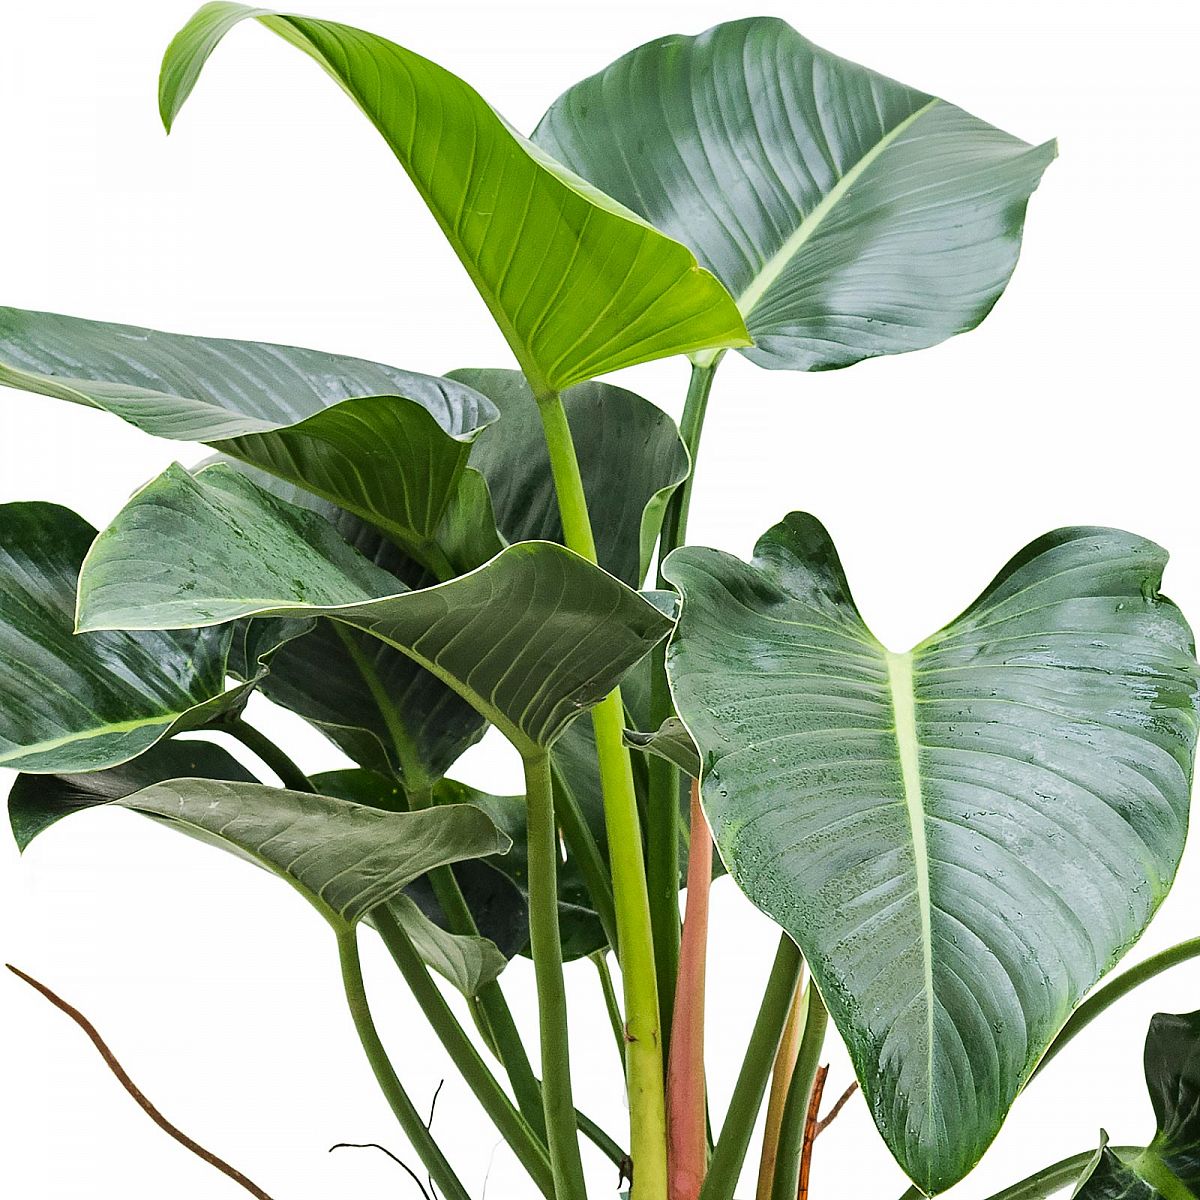 Lush Heart-Leaf Philodendron 'Green Beauty' Indoor House Plants